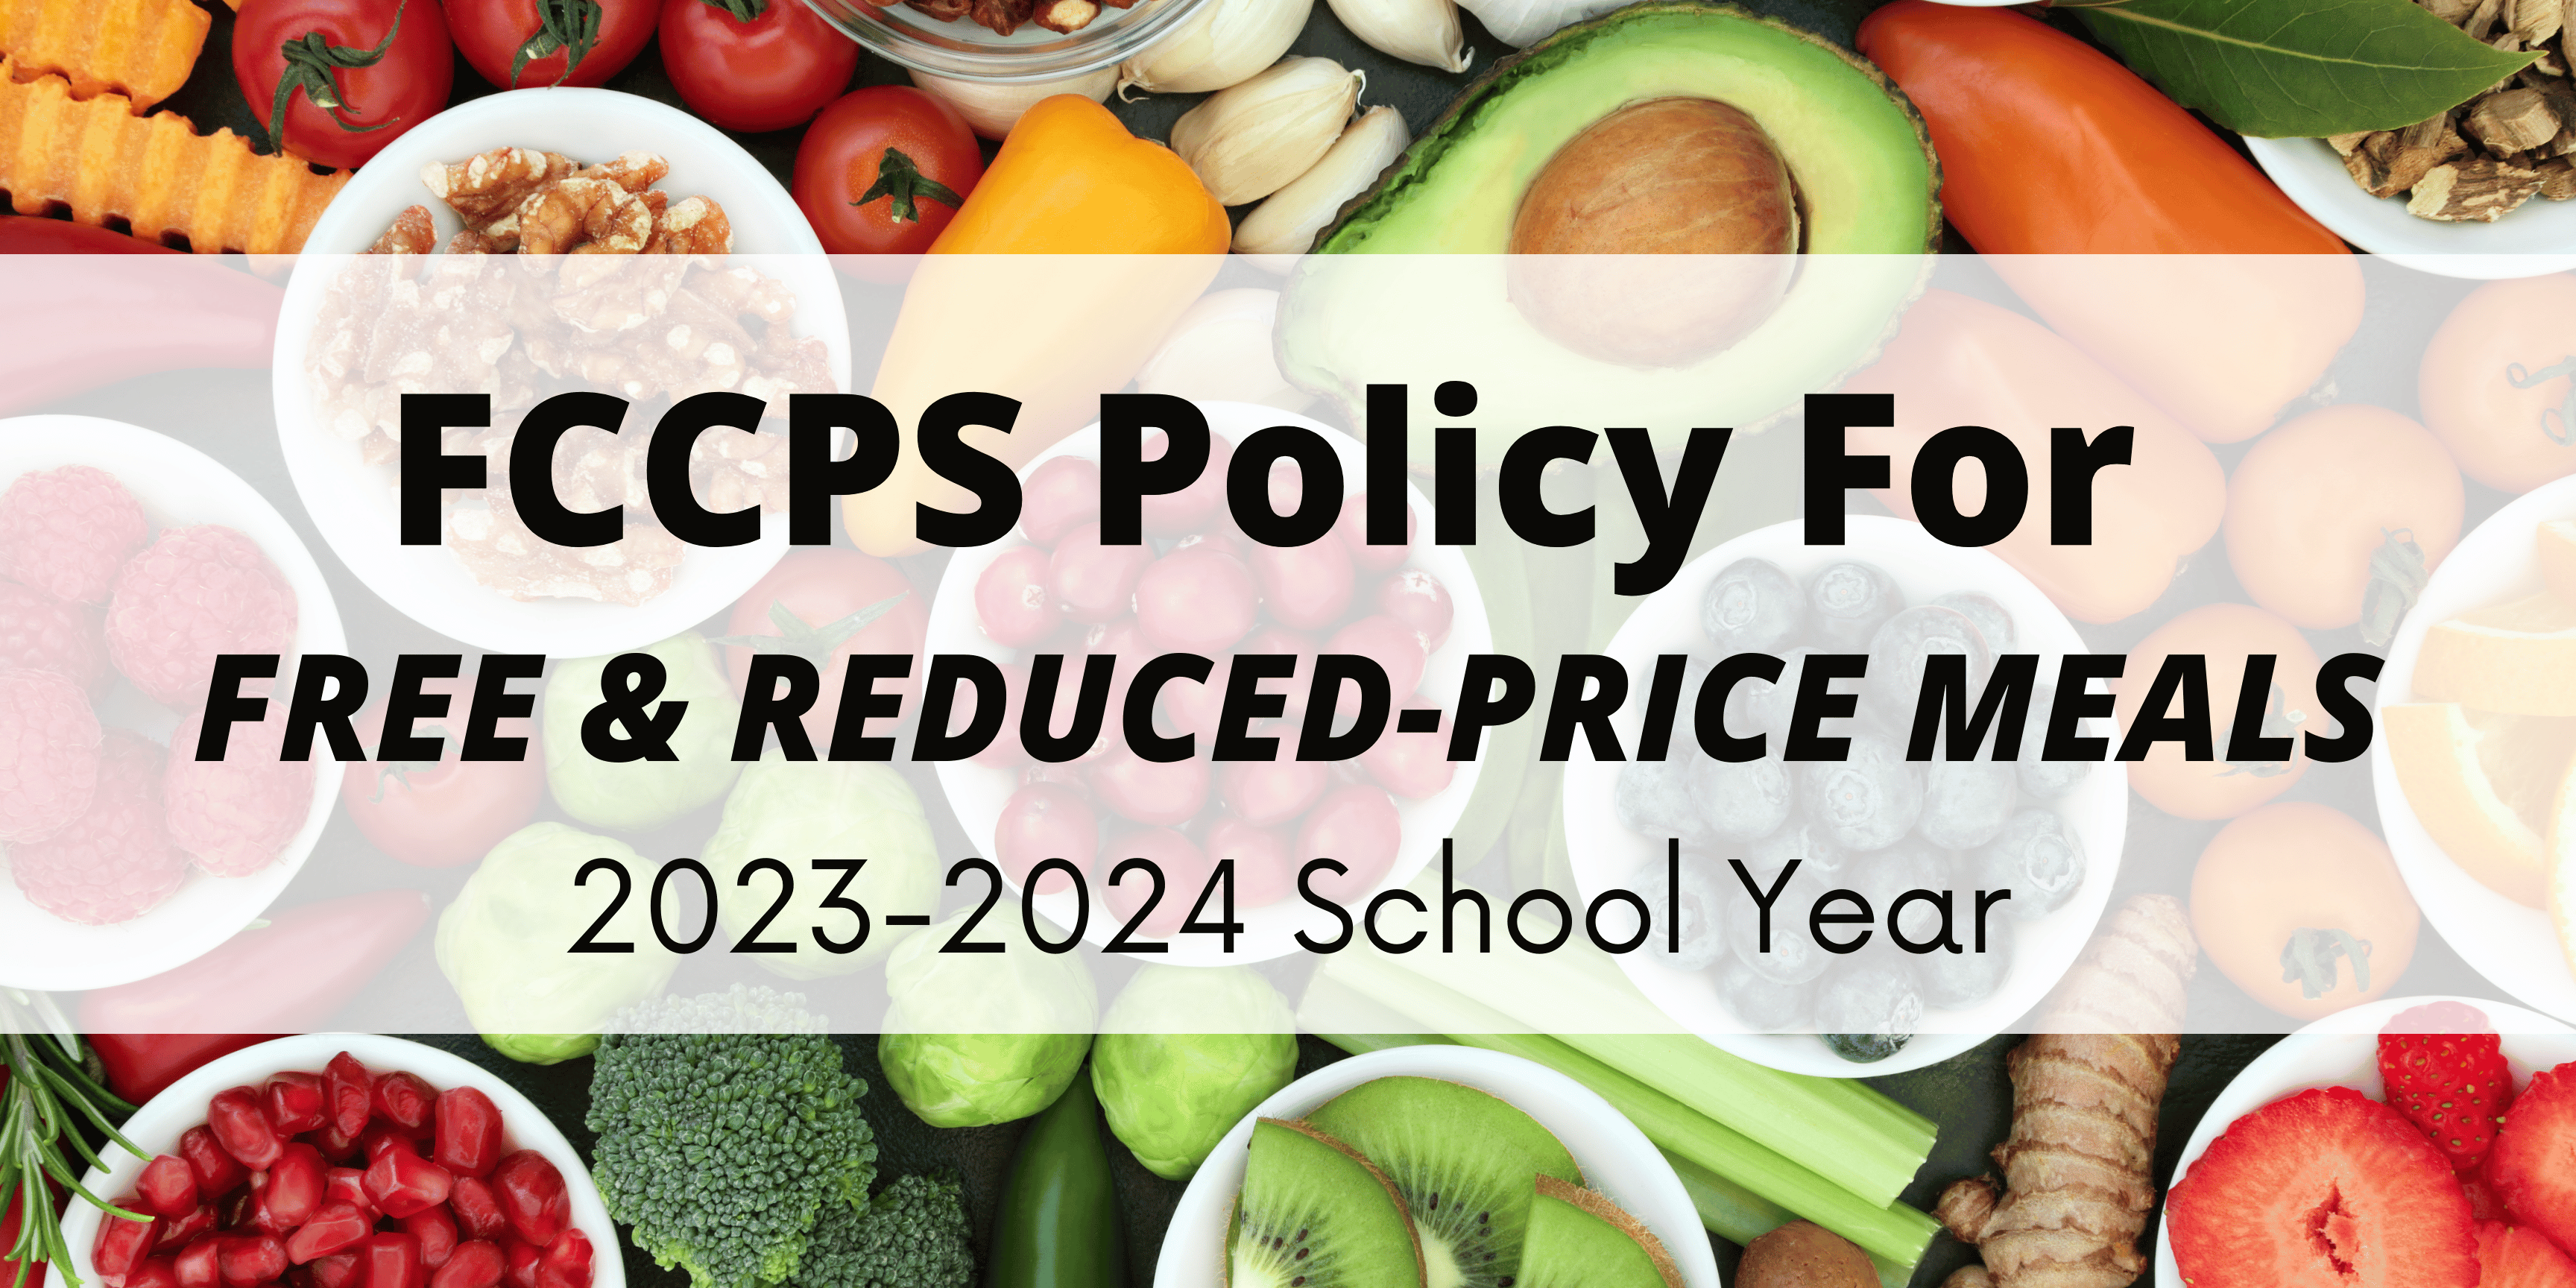 FCCPS Policy for Free & Reduced-Price Meals for the 2023-24 School Year